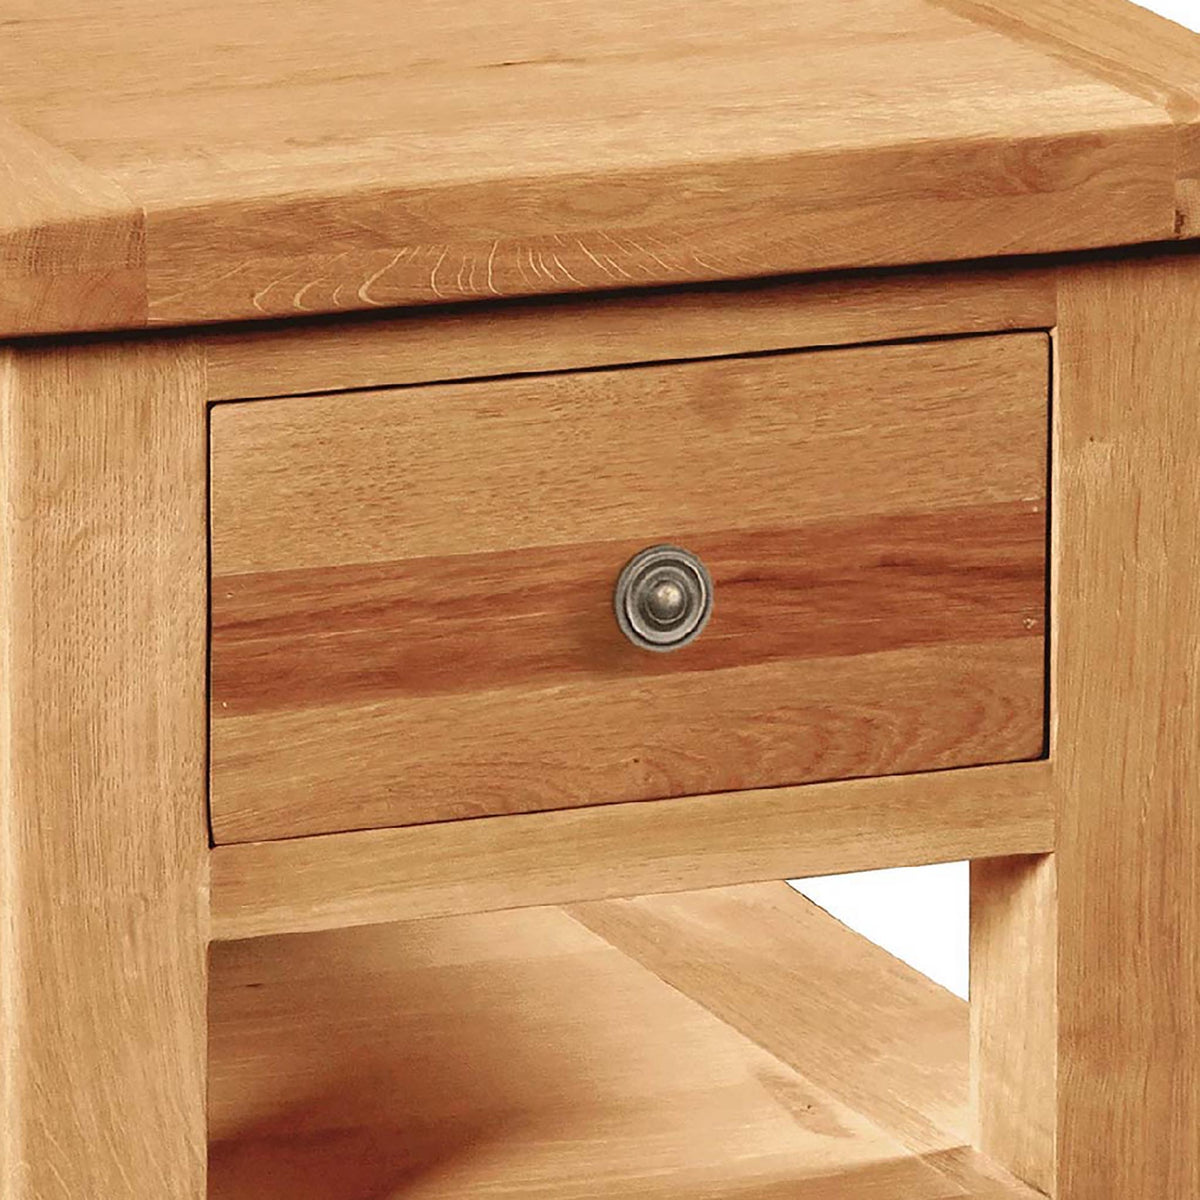 Sidmouth Lamp Table With Drawer - Close Up of Drawer Front